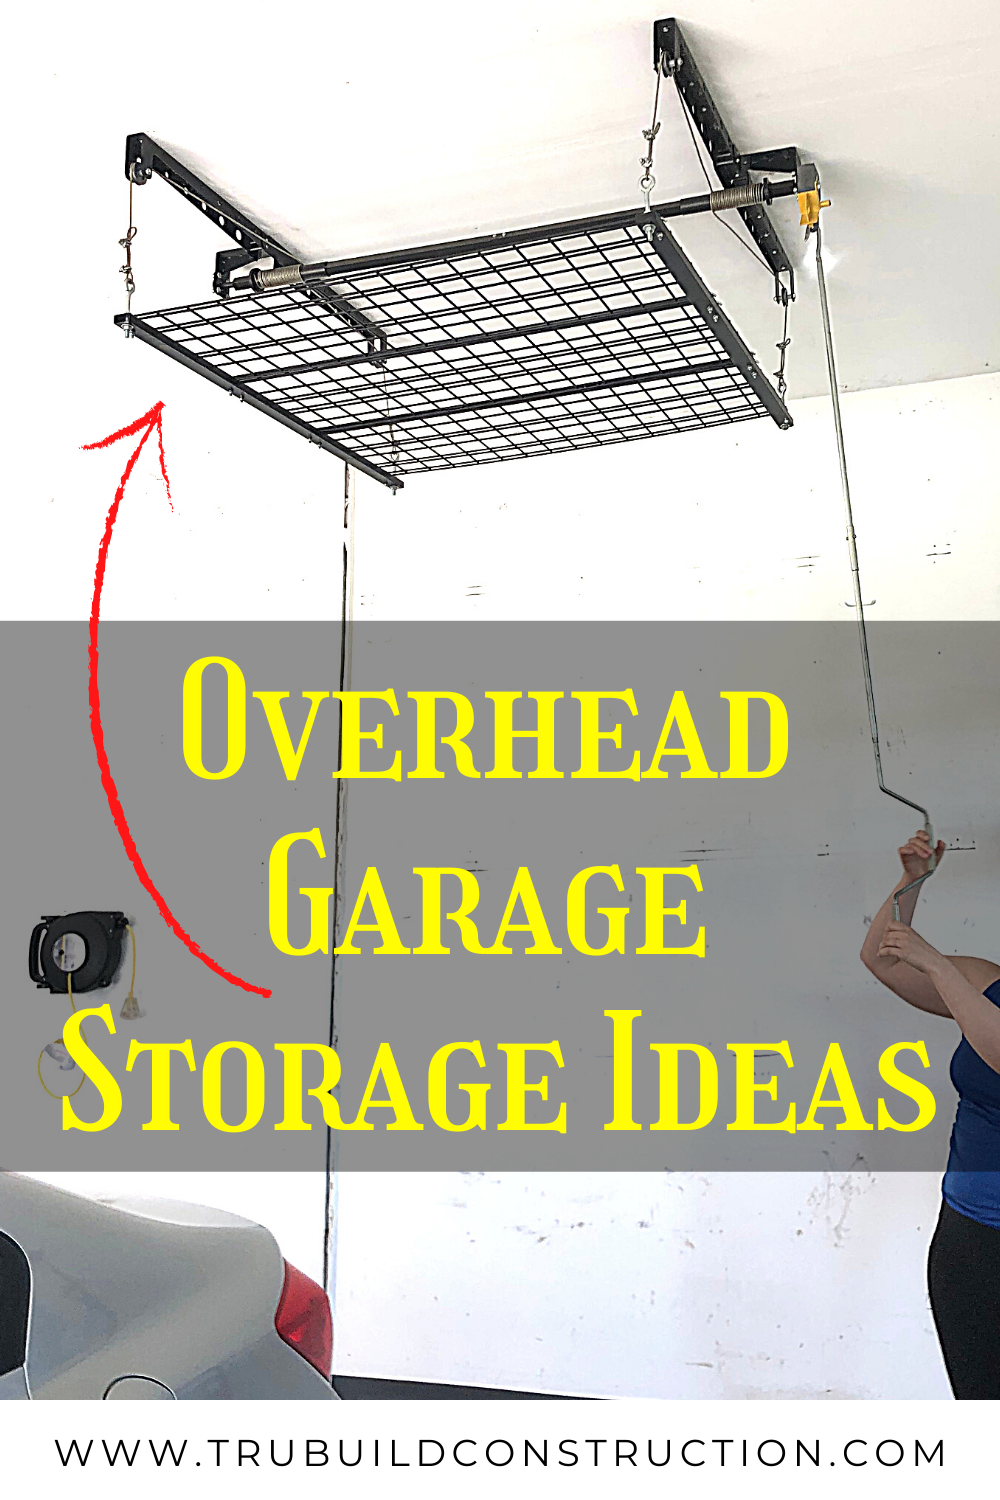 Typically, overhead storage systems measure somewhere between 4ft x 4ft and 4ft x 8ft. Overhead Garage Storage Ideas That Will Make Organization Easy Trubuild Construction